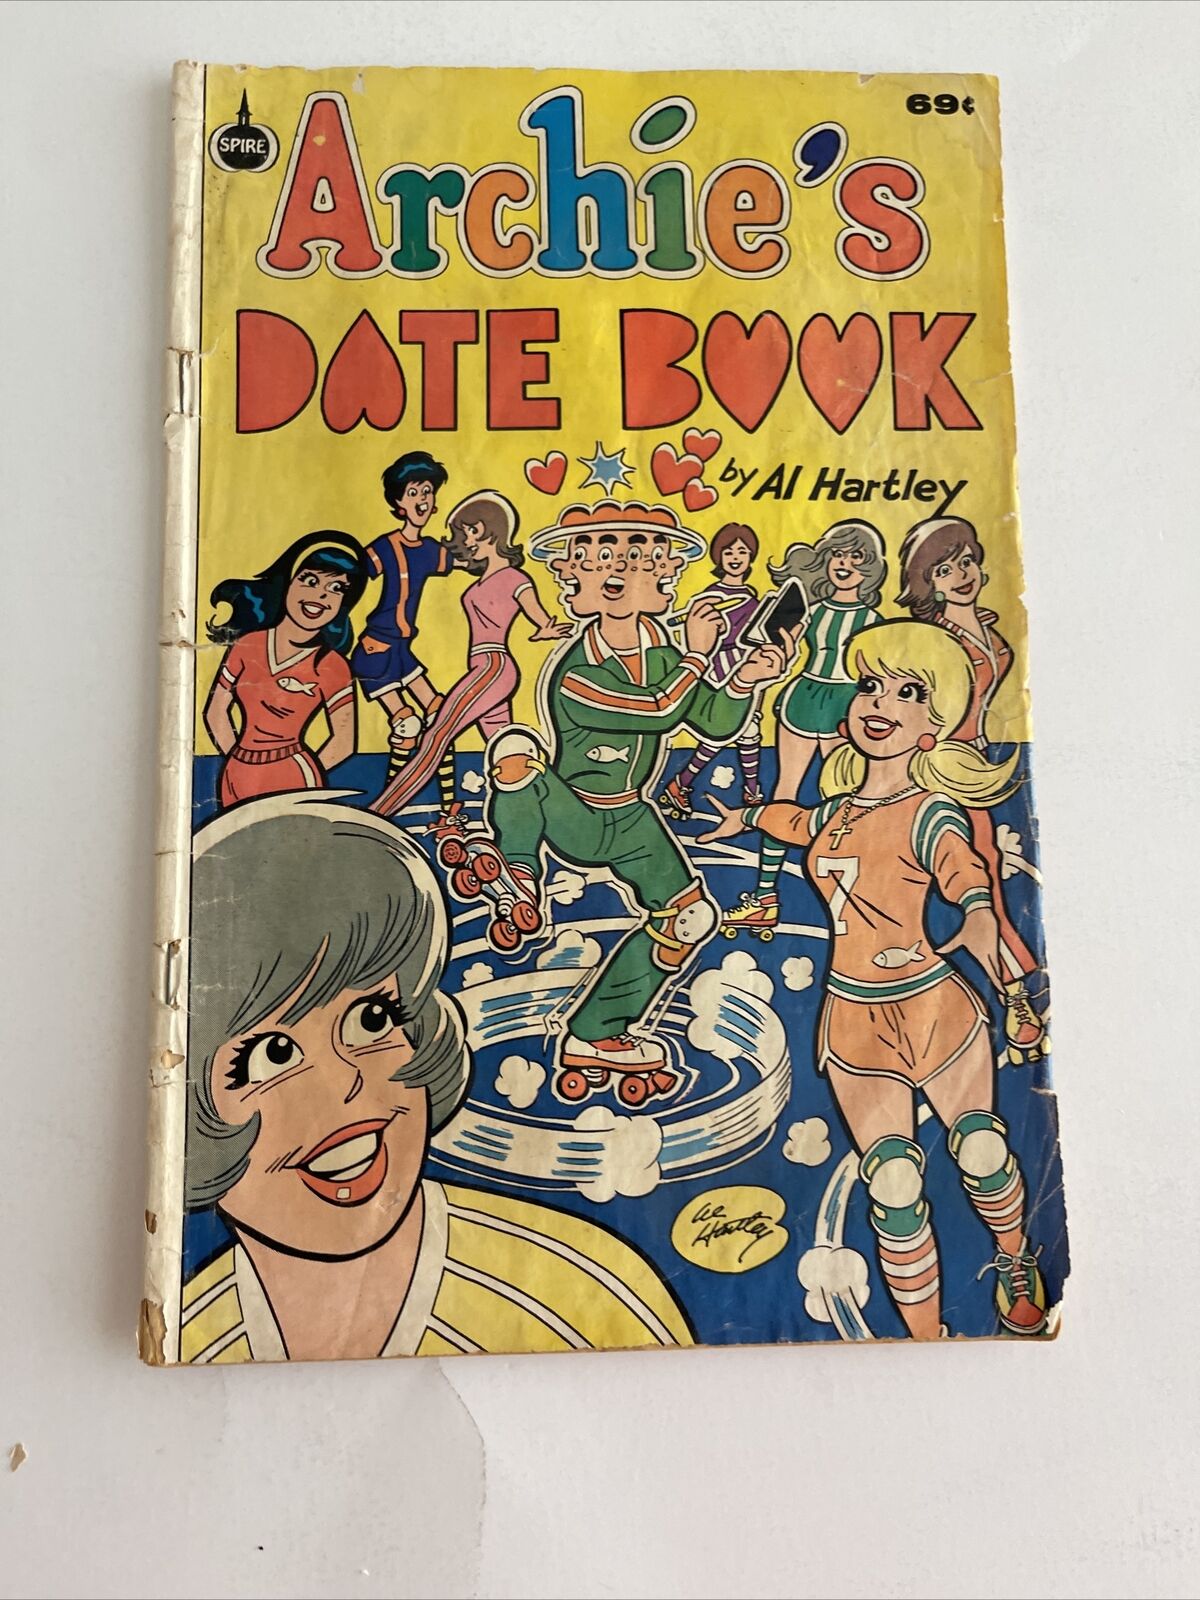 ARCHIE'S DATE BOOK by Al Hartley  69 CENTS 1981 SPIRE Low Print Run